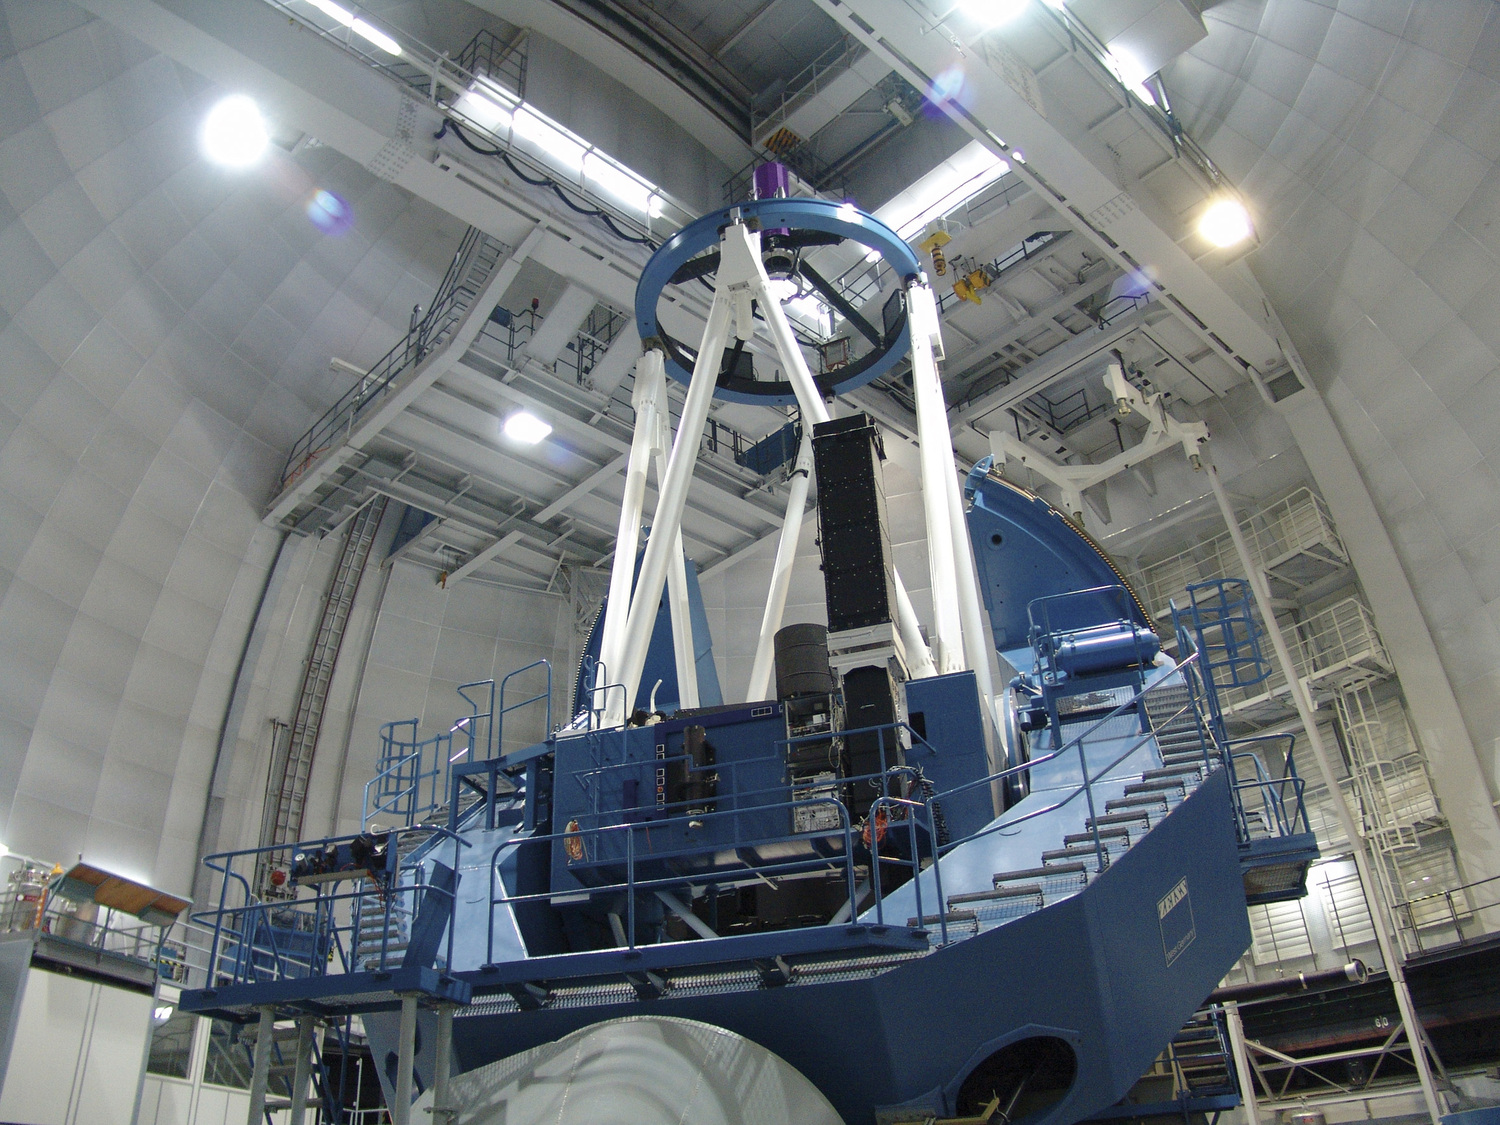 3.5-m telescope at the Calar Alto observatory where the CARMENES spectrograph is installed.